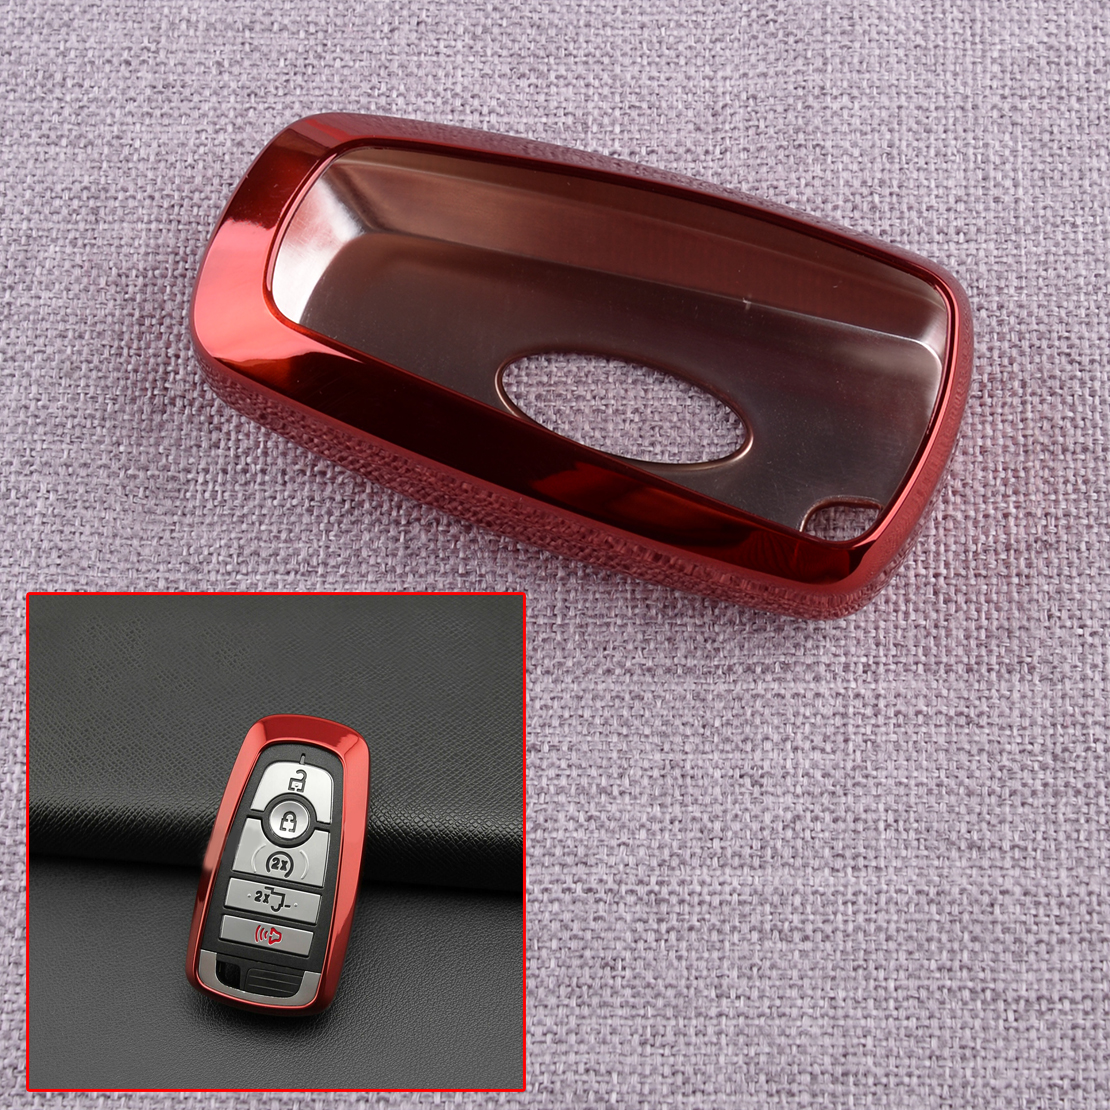 Remote Key Fob Cover Case Chain Fit for Ford Fusion F-150 Mustang 2018 2019 2020 | eBay